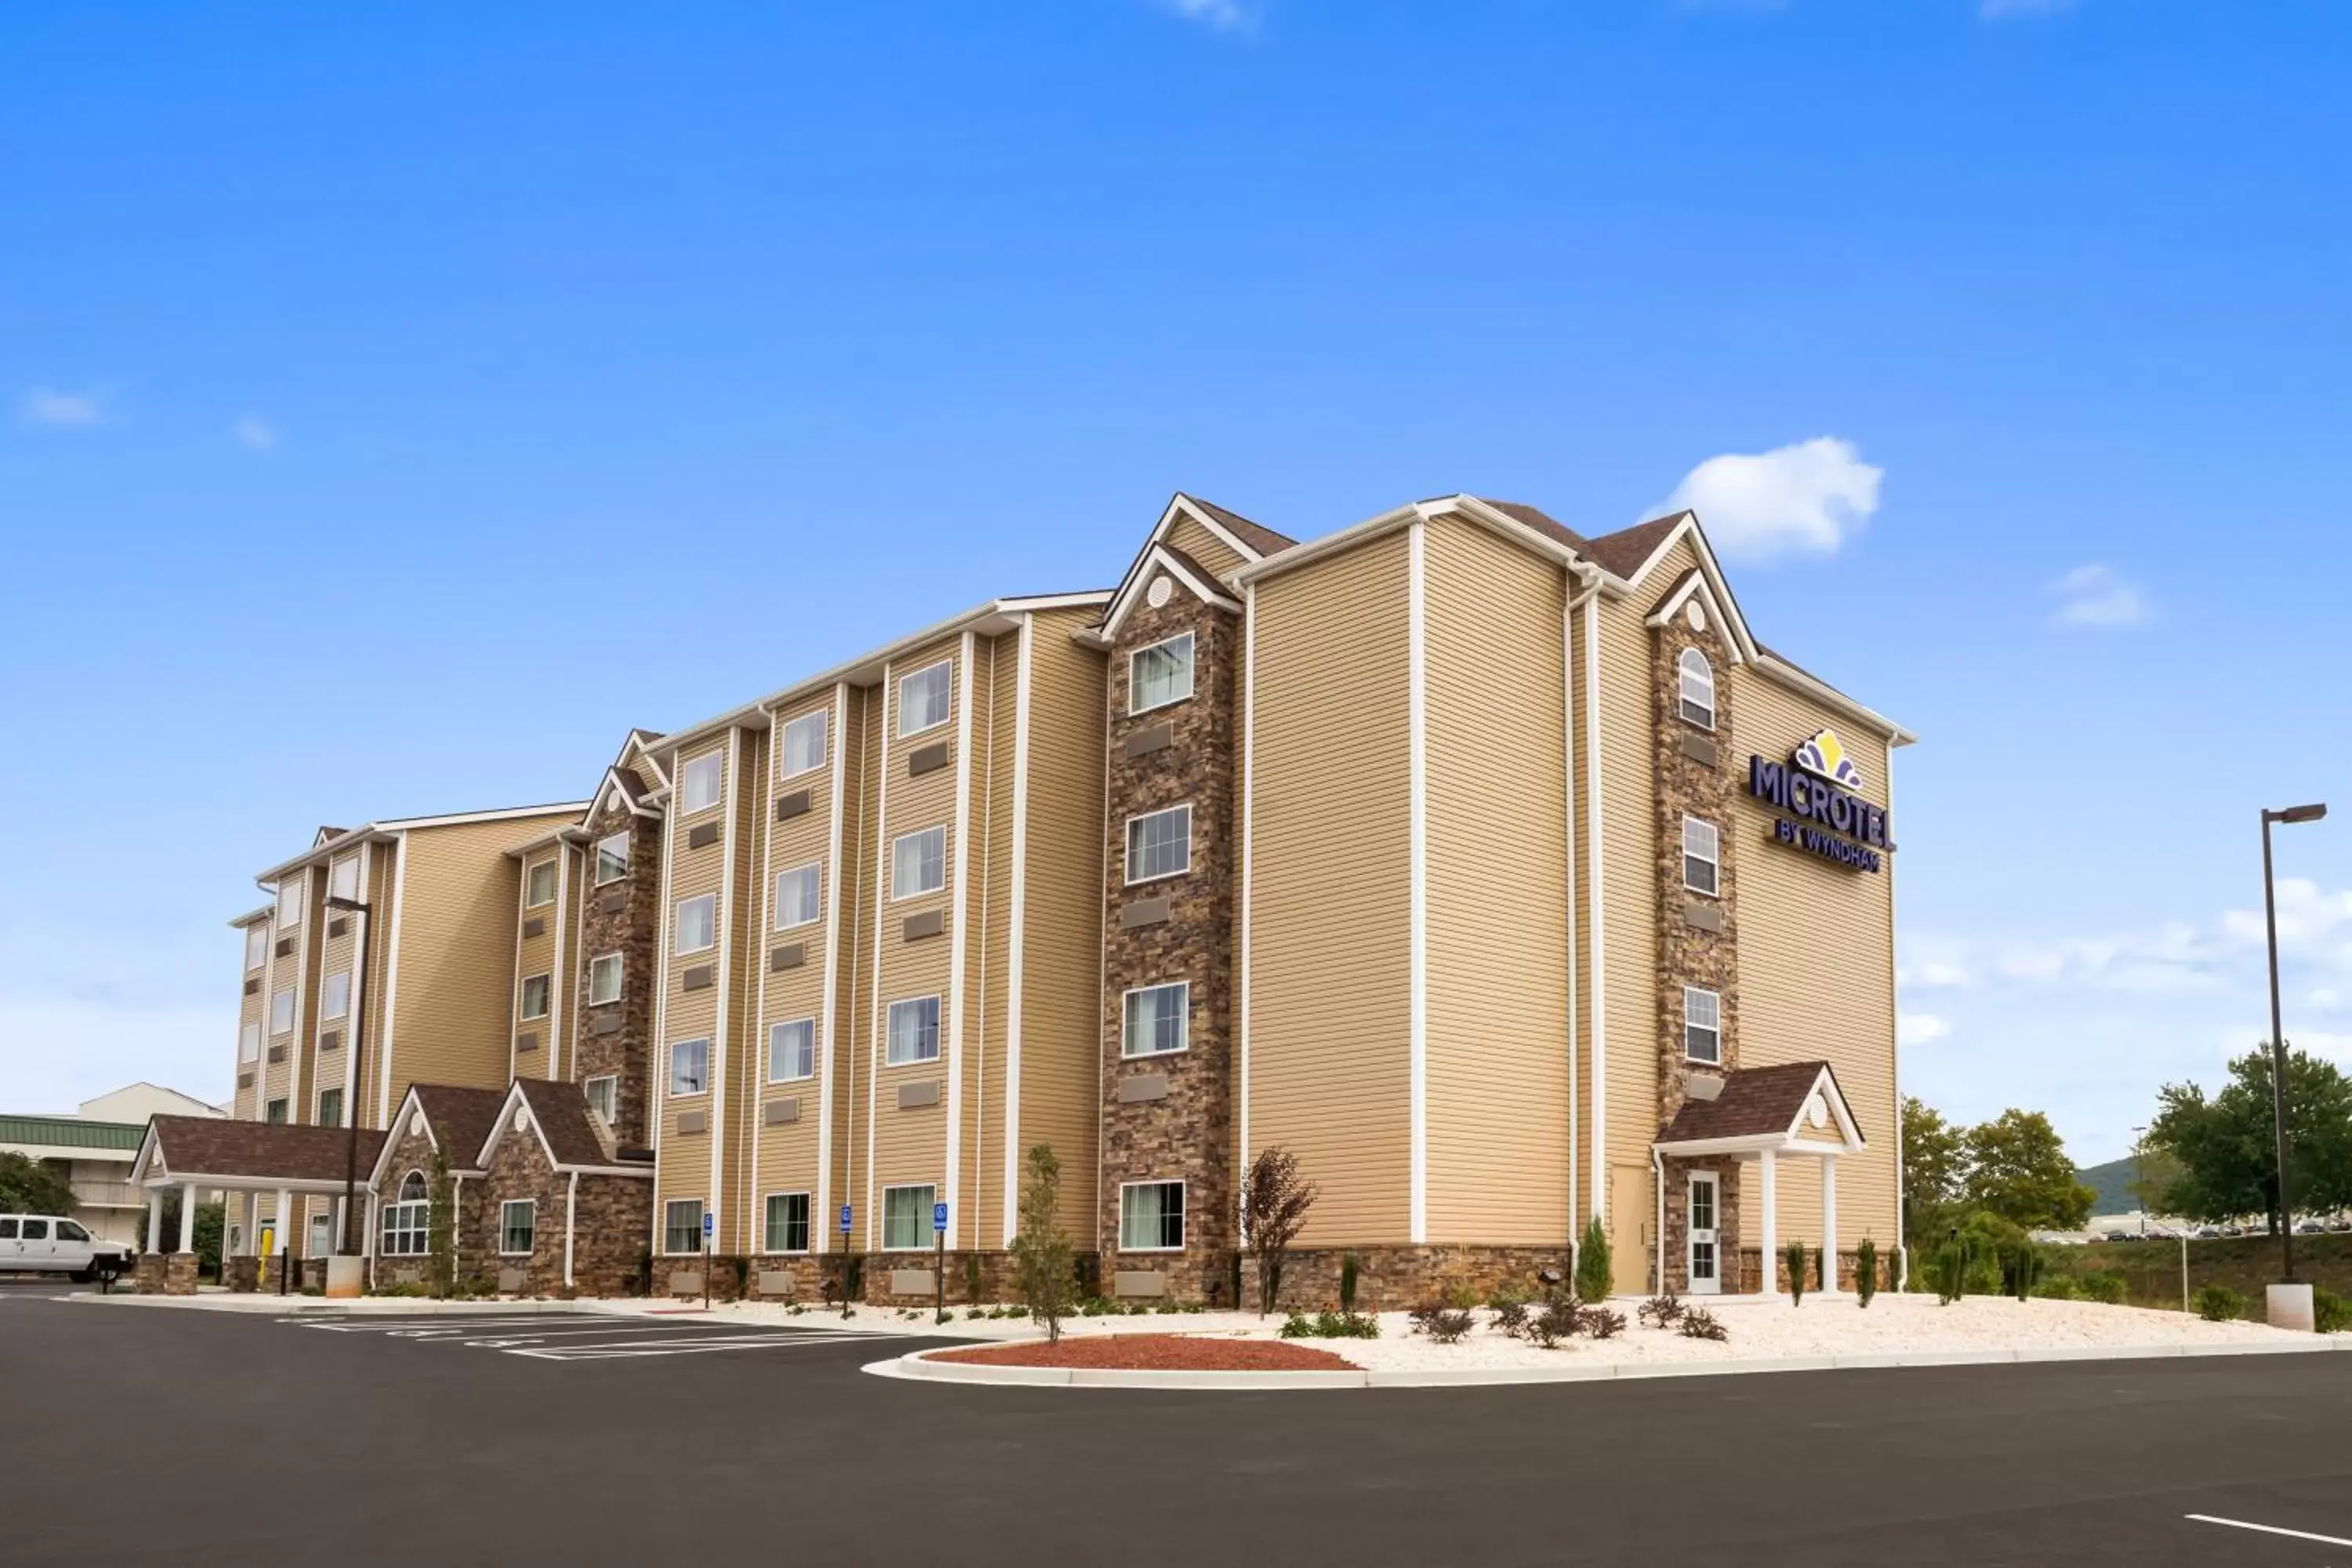 Facade/entrance, Property Building in Microtel Inn & Suites by Wyndham